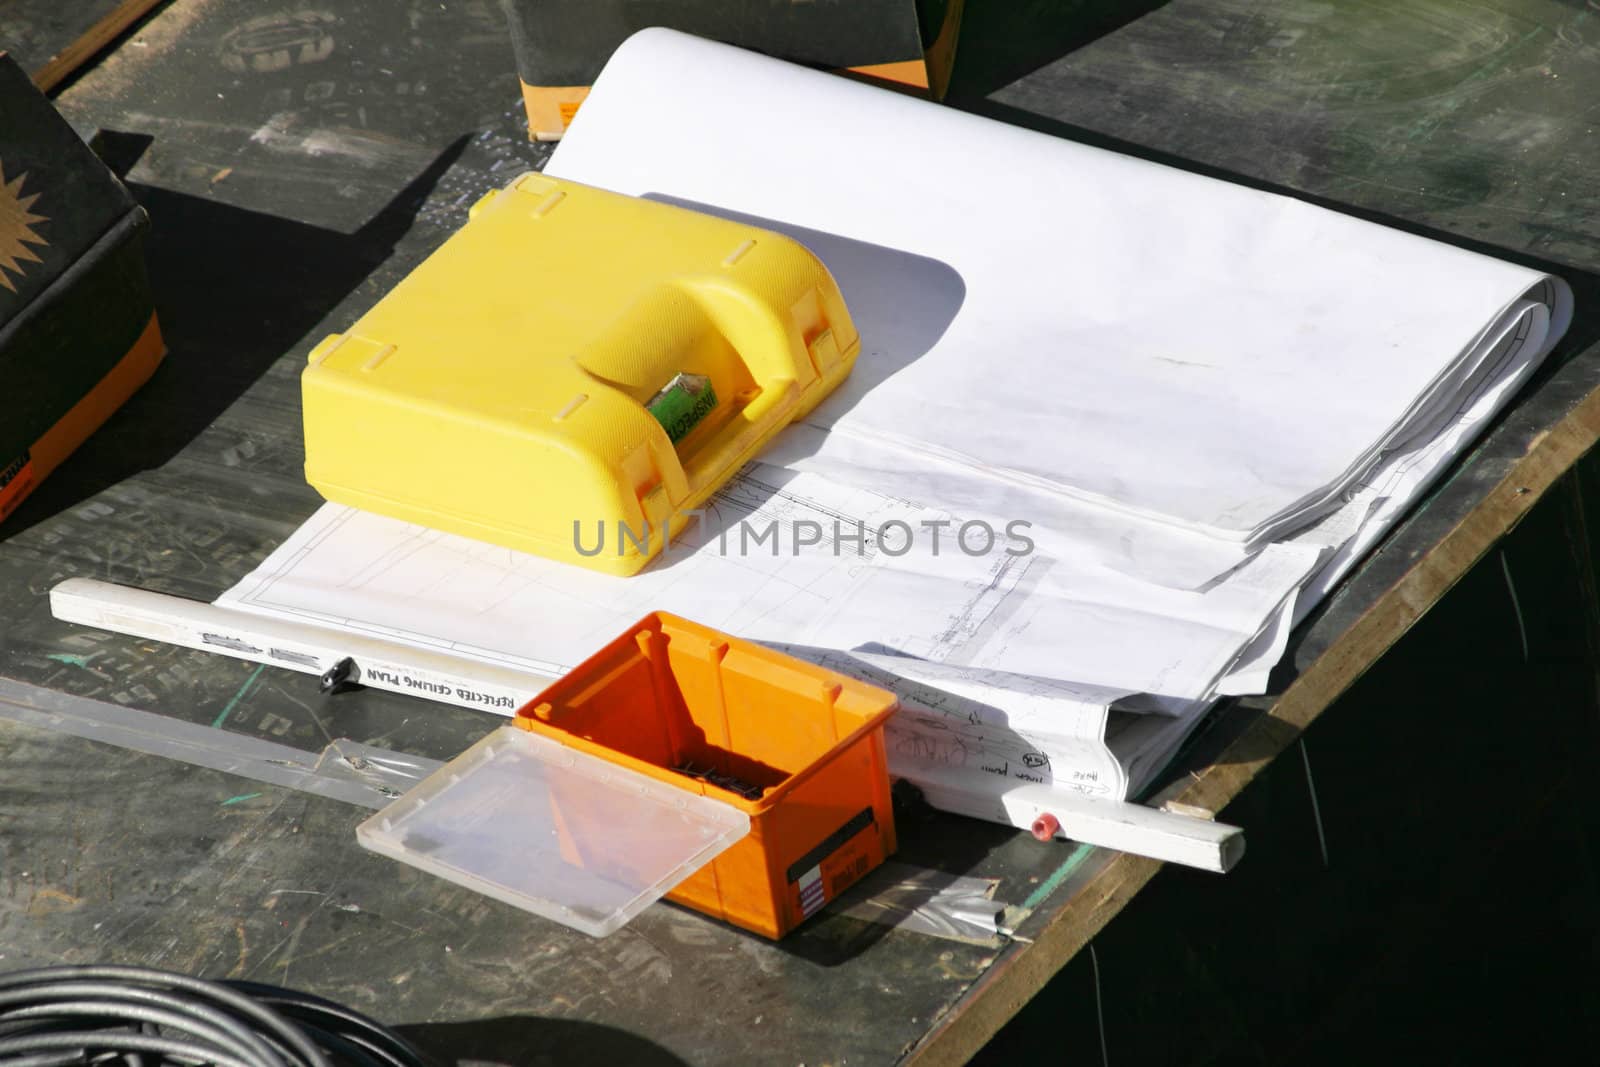 Plans on a worksite, an inspection box and toolbox